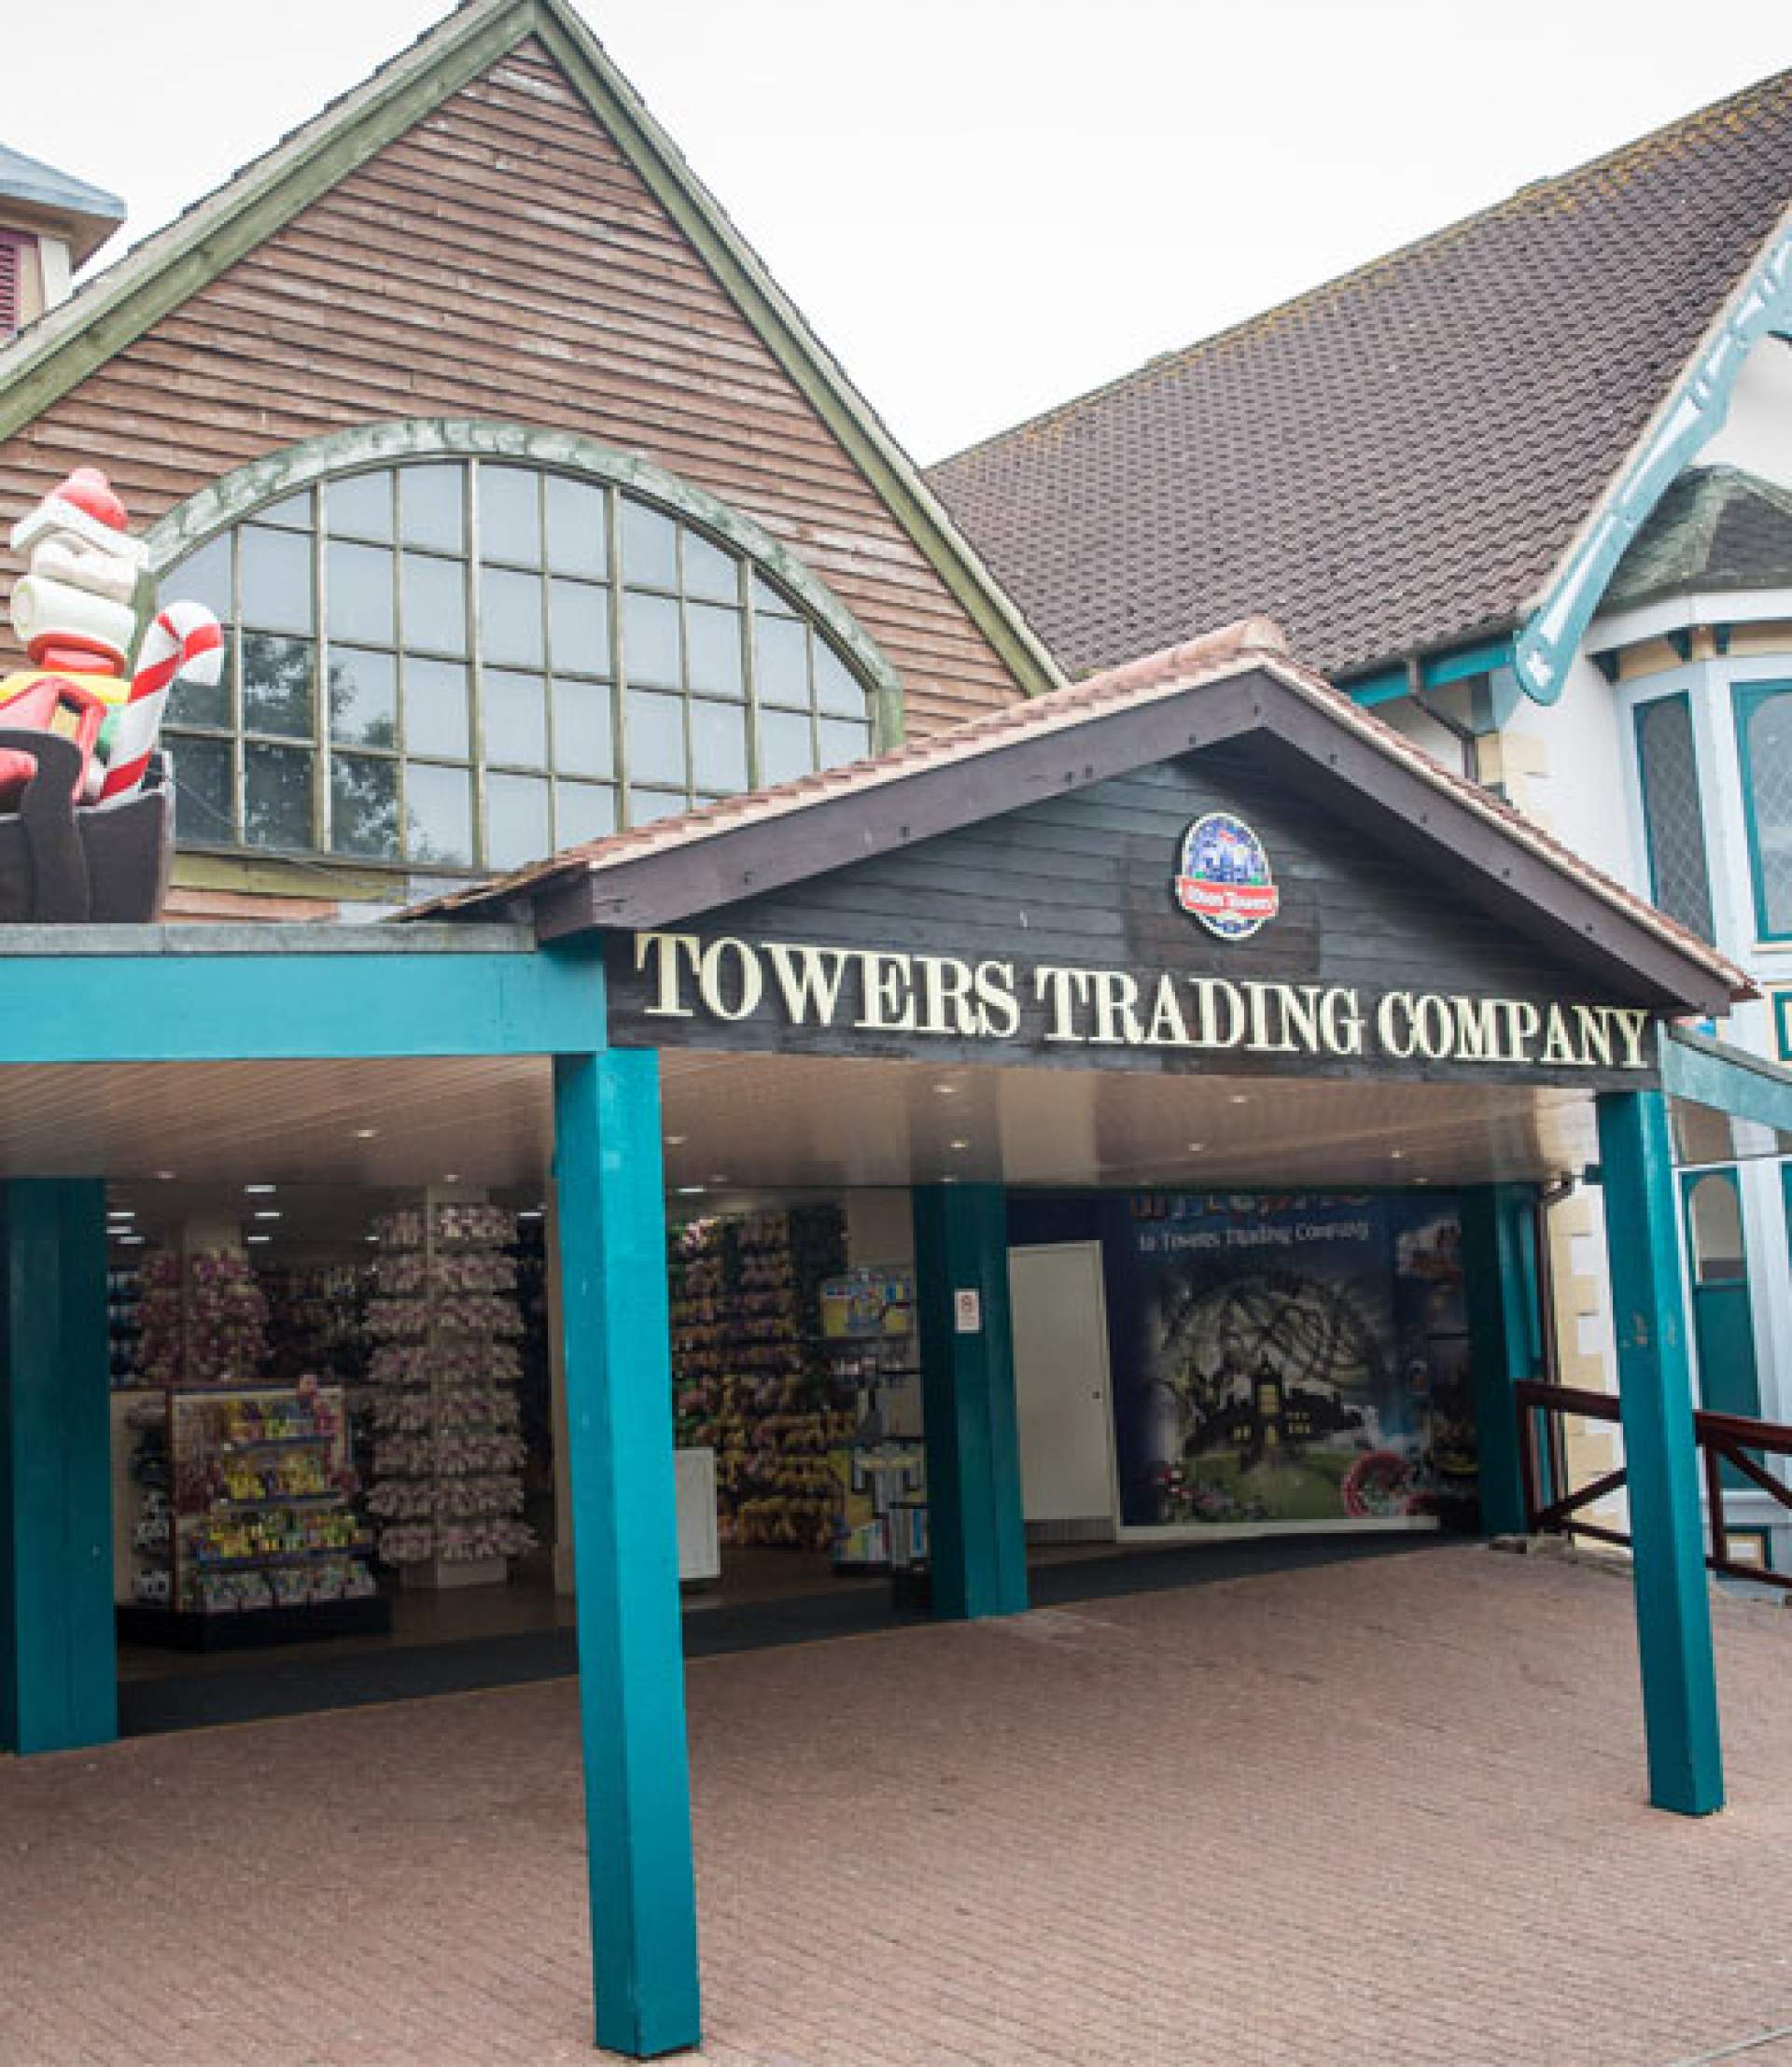 Towers trading shop